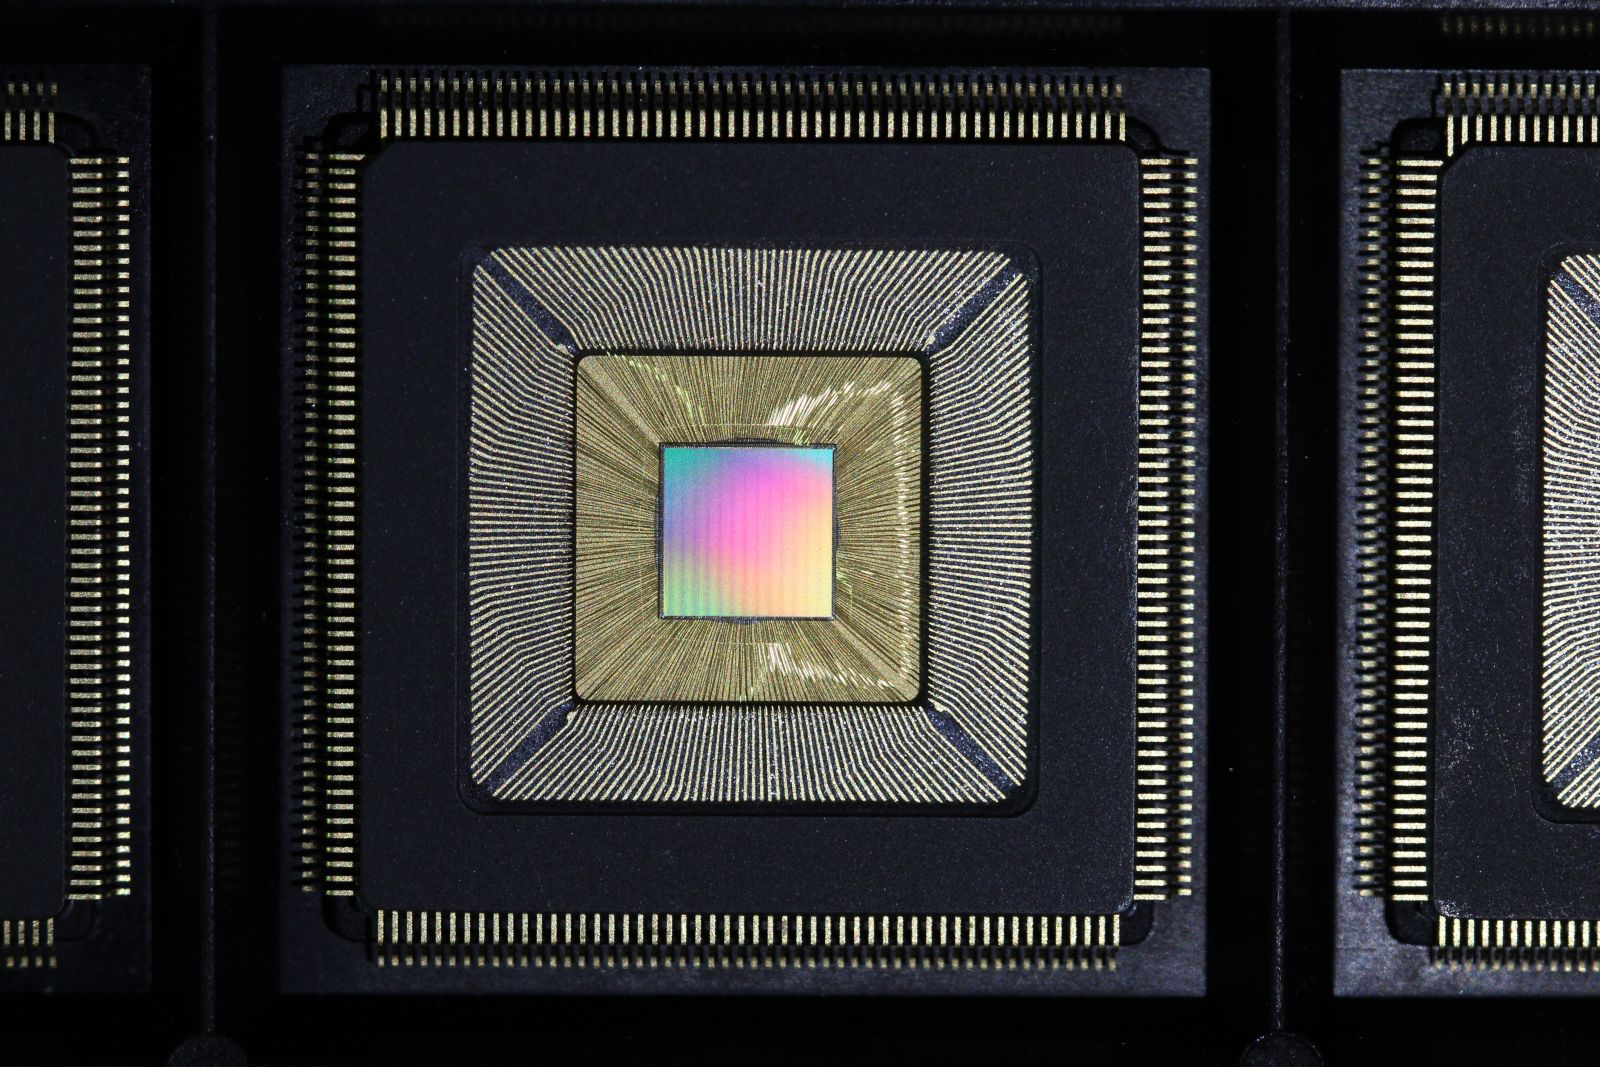 The Princeton Piton Processor is shown without its protective lid. Multicolored silicon die is bonded to wires inside the chip package.